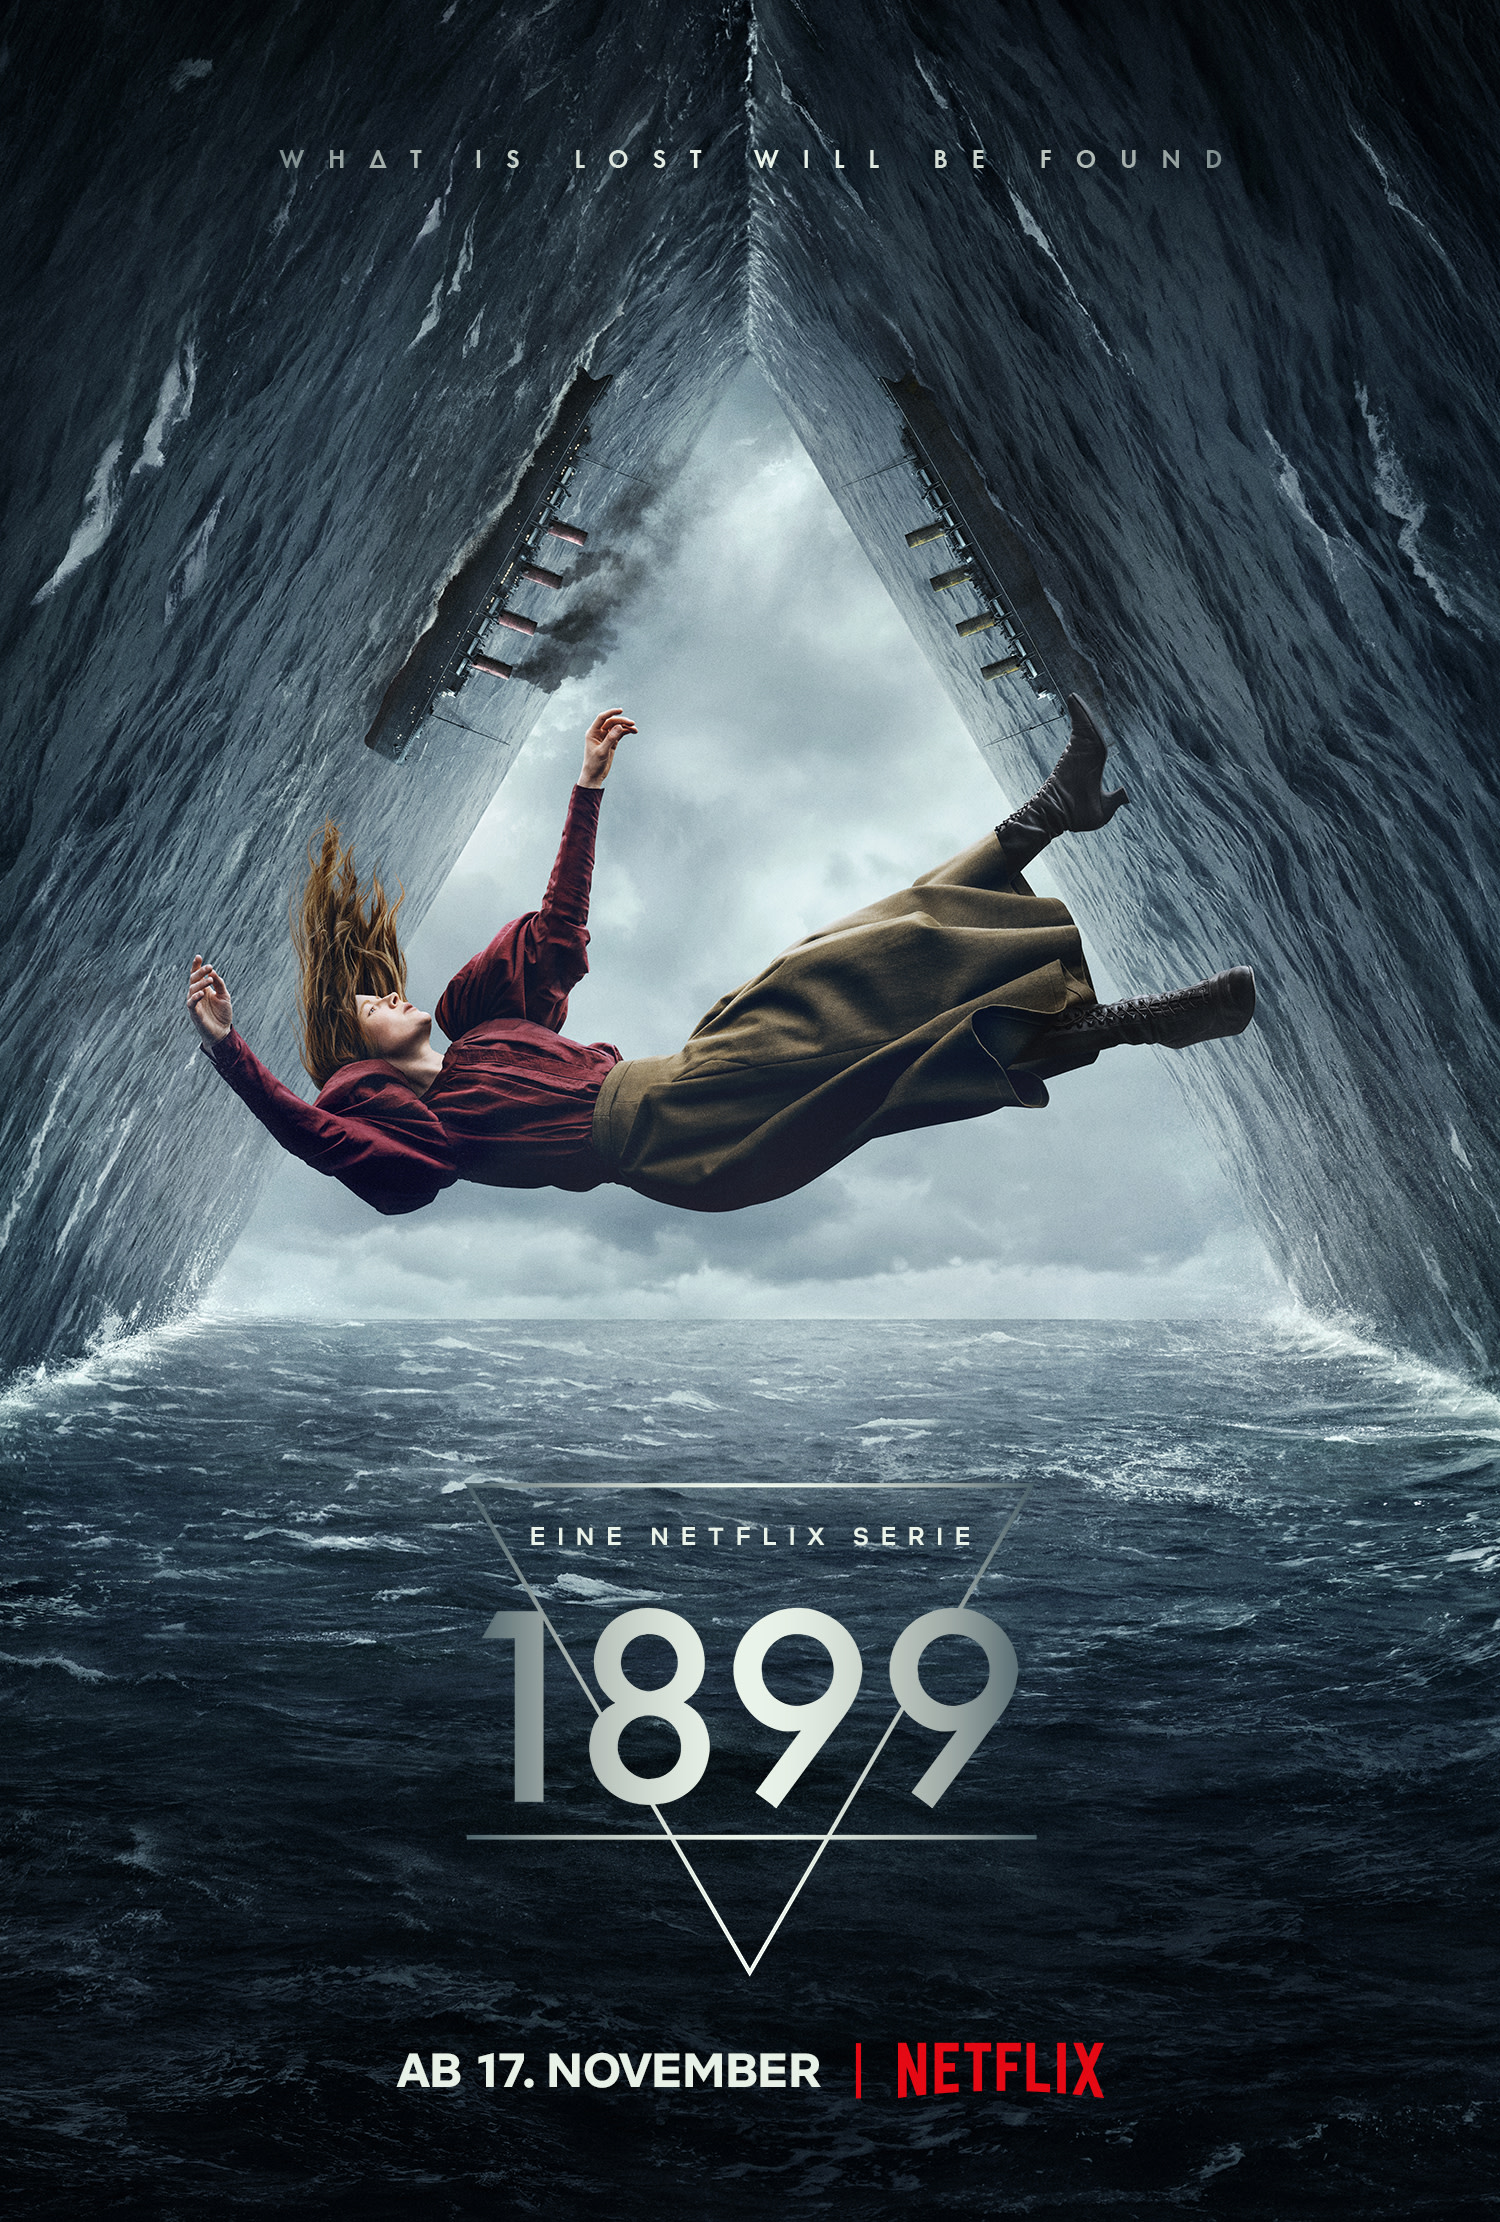 Exciting featurettes available for 1899